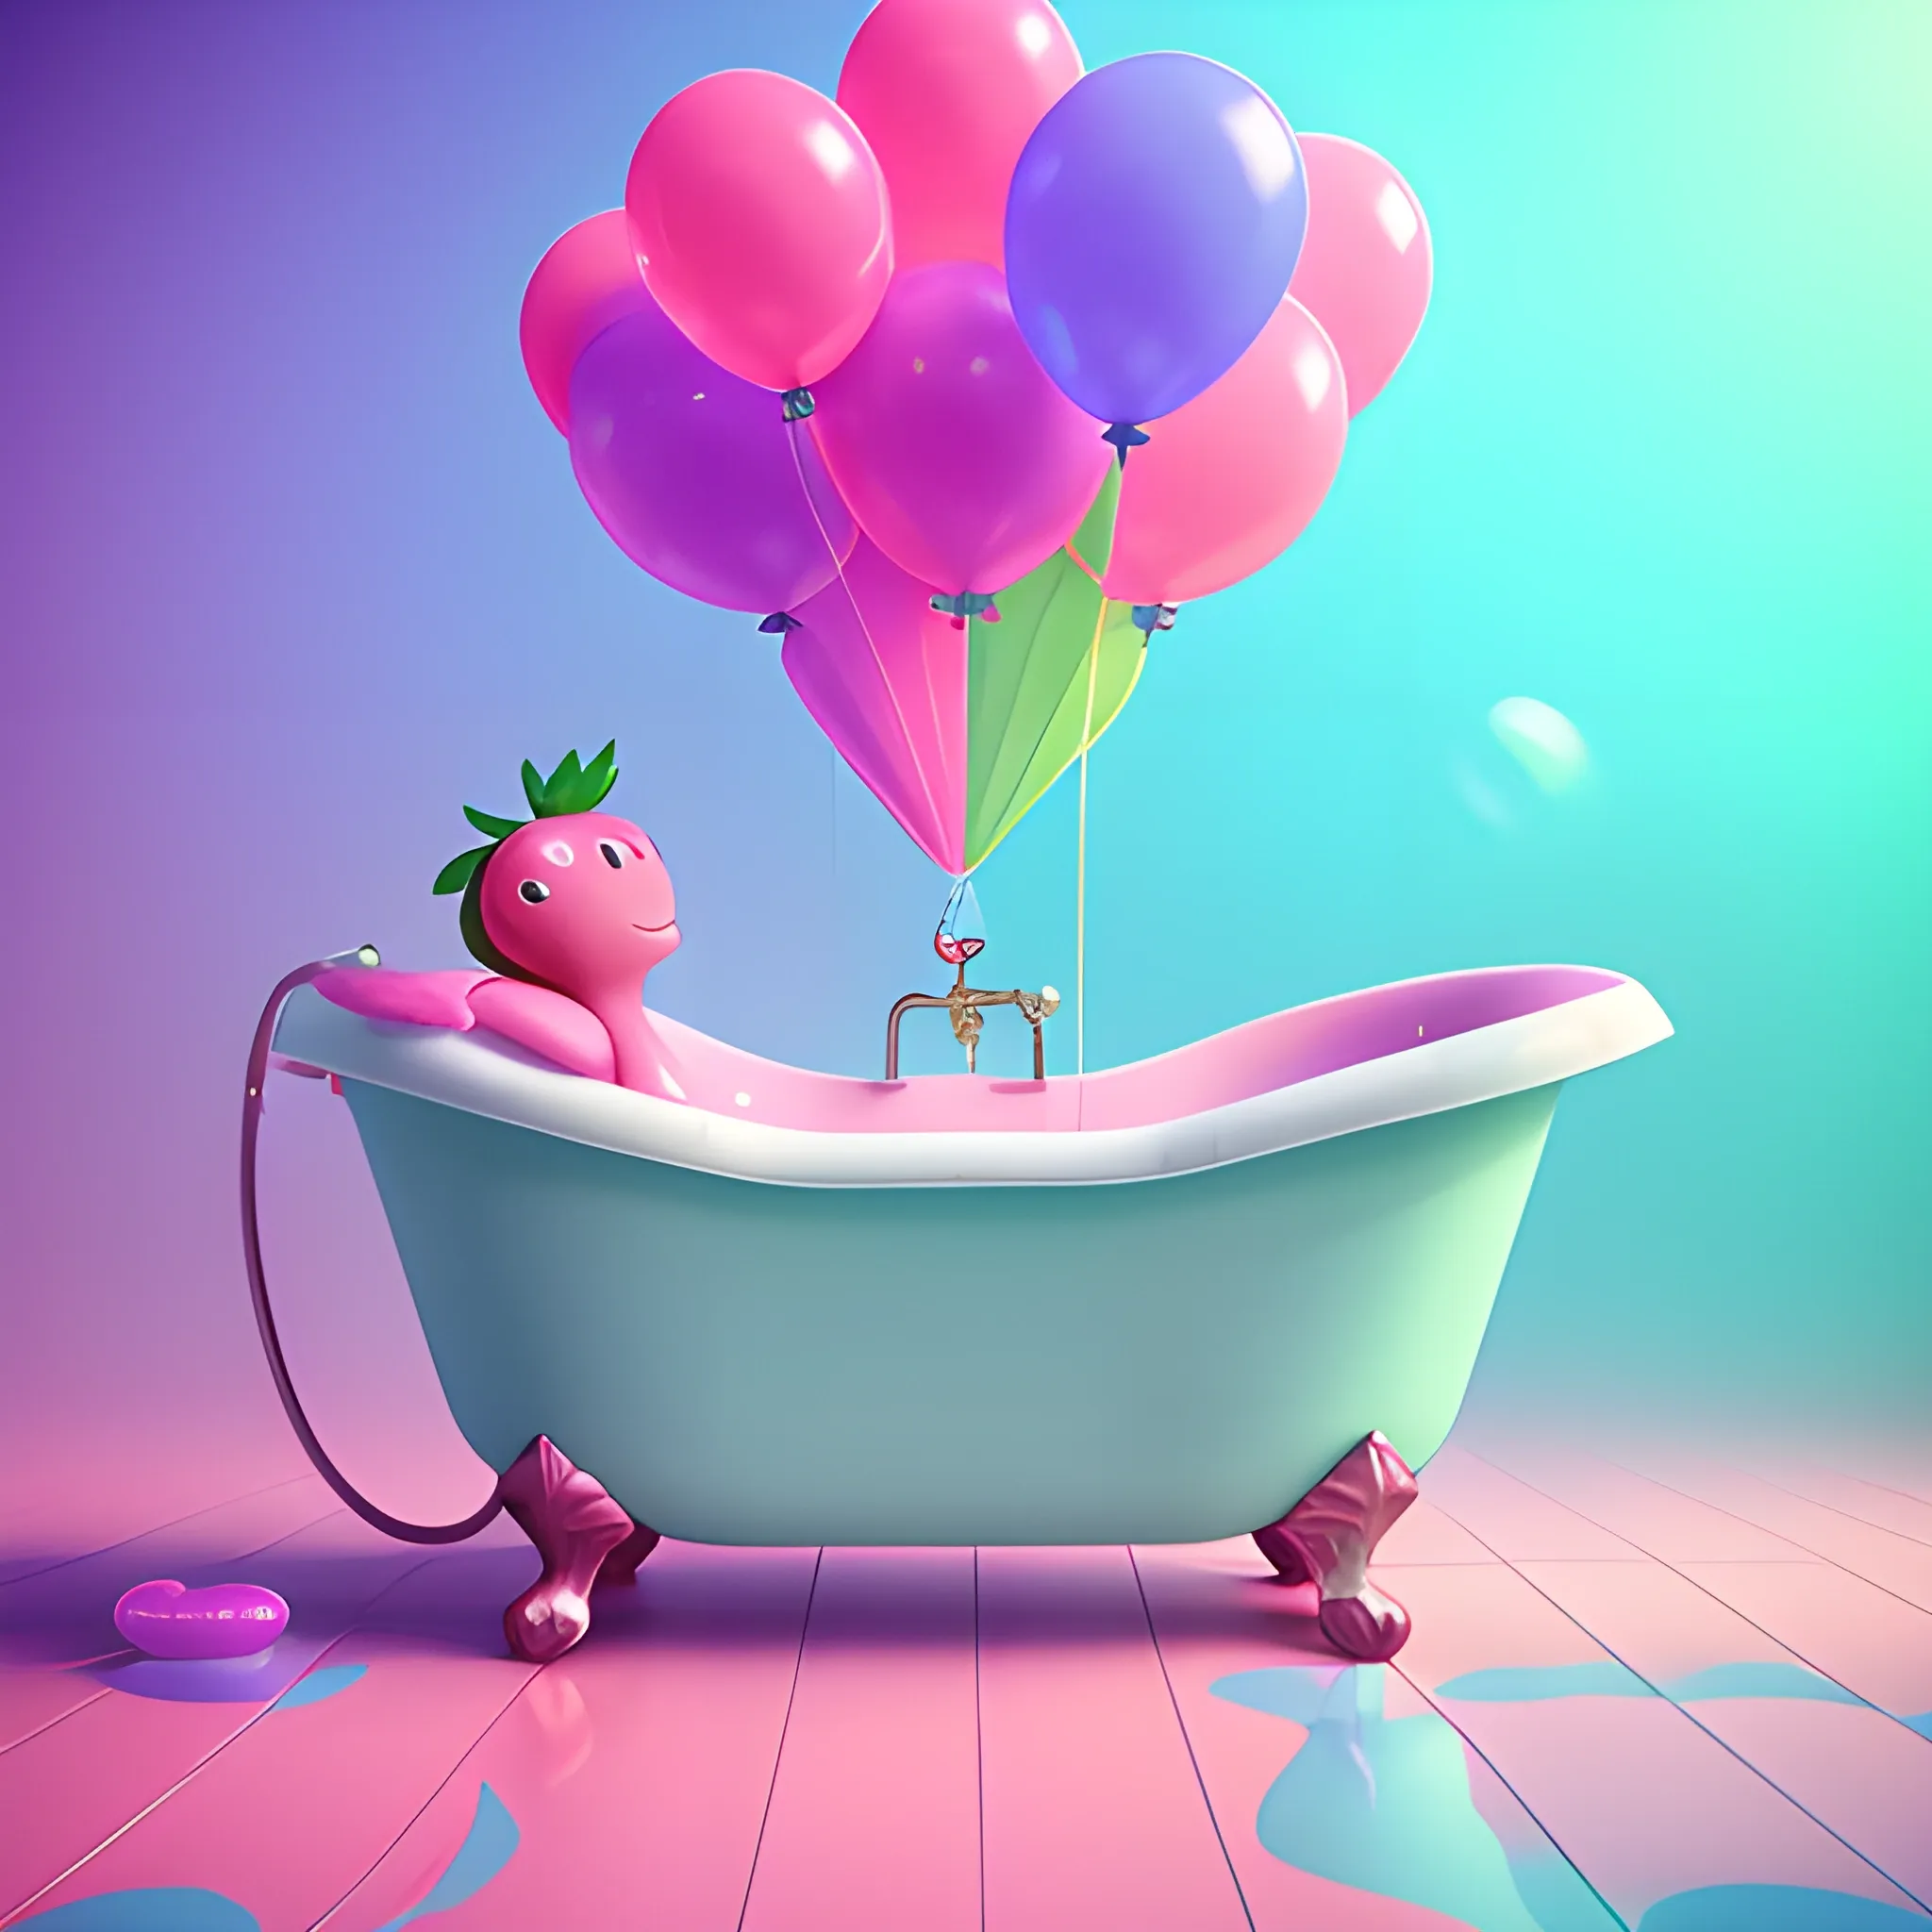  a strawberry is relaxing into a bathtub, pink purple light blue and green bubbles, colorful balloons in the air, saturated colors, 3d ZBrush, CGI unreal engine, whimsical details, Cartoon,